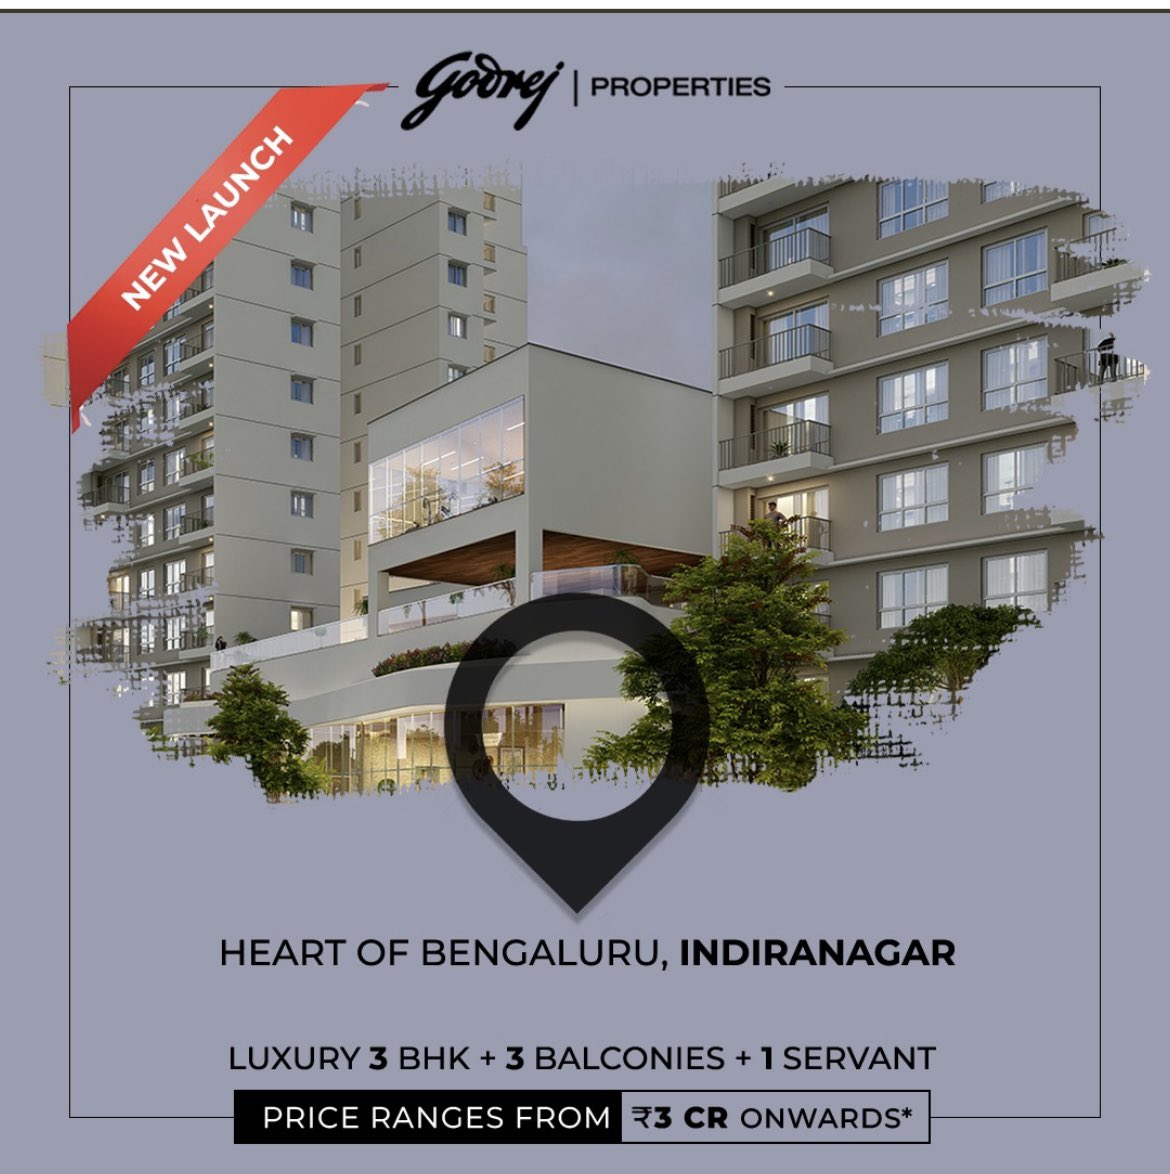 How can So-Woke-Indira-Nagar even have a SQ? This ad is too dramatic. 

Whatte #peakbengaluru